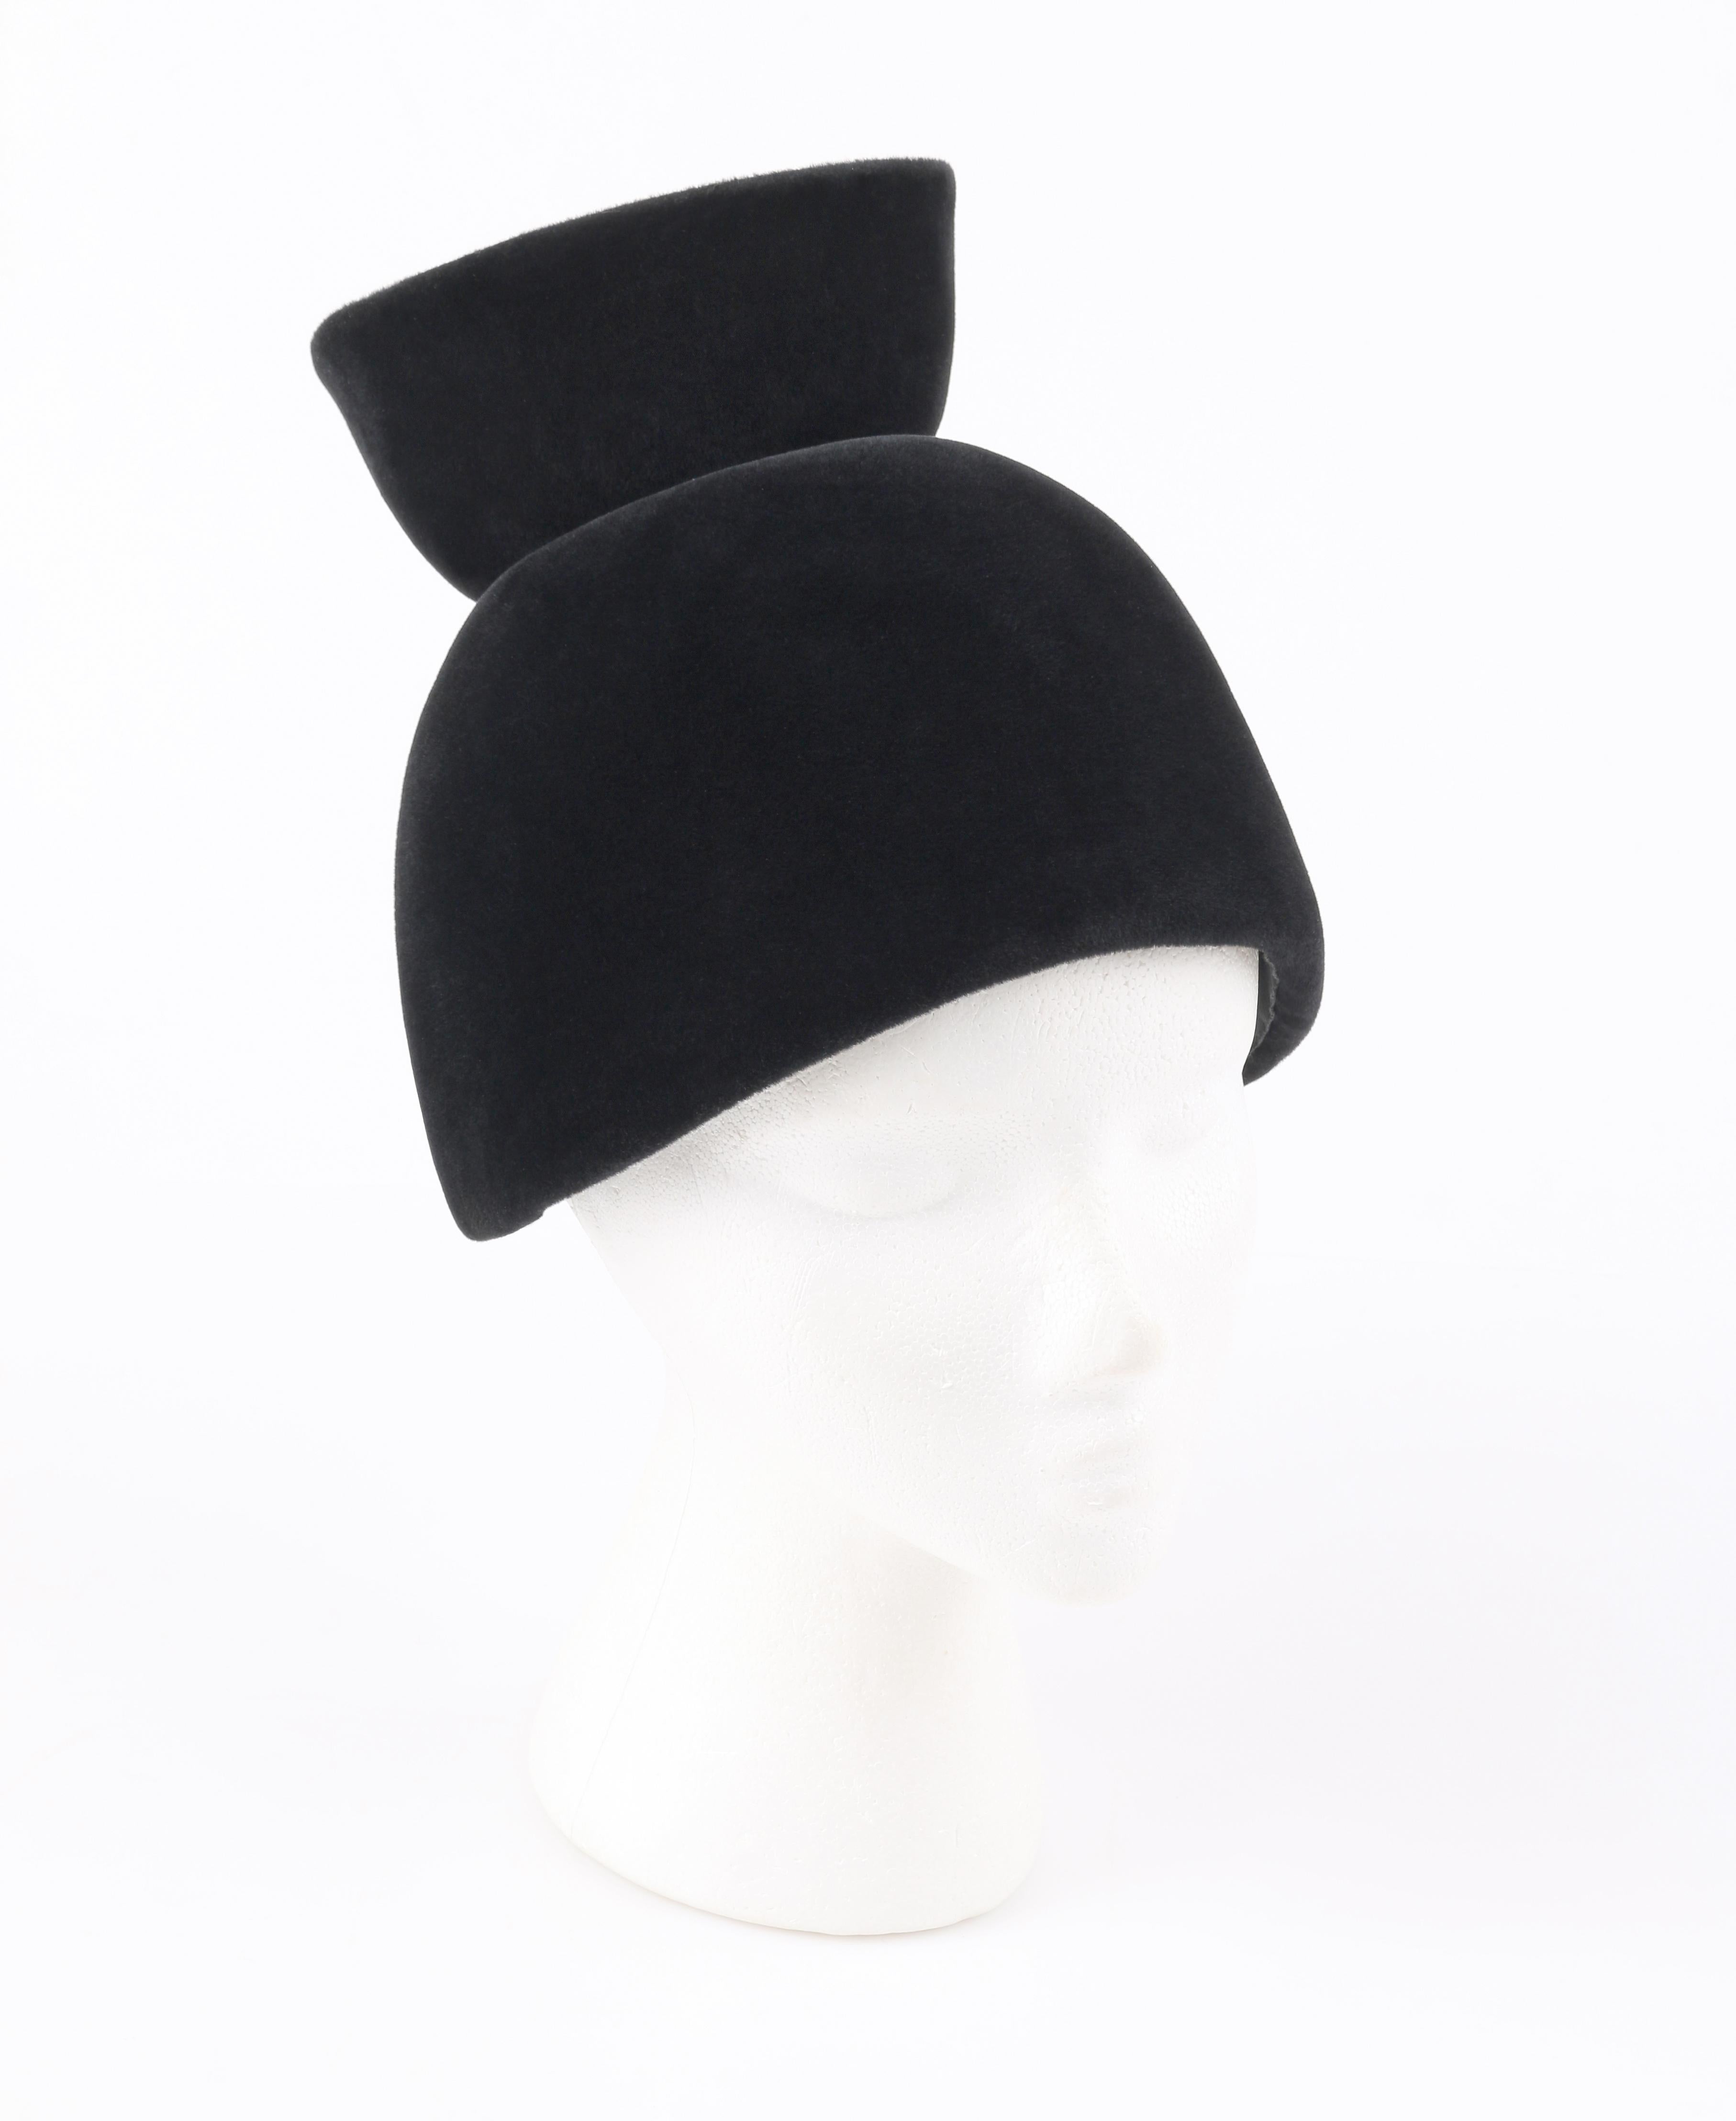 DESCRIPTION: CESARE CANESSA c.1950's Haute Couture Numbered Black Velvet Sculptural Hat 
 
Circa: c.1950’s
Label(s): Cesare Canessa Roma; Made In Italy Exclusively for Bonwit Teller
Style: Sculptural hat
Color(s): Black
Lined: Yes
Unmarked Fabric